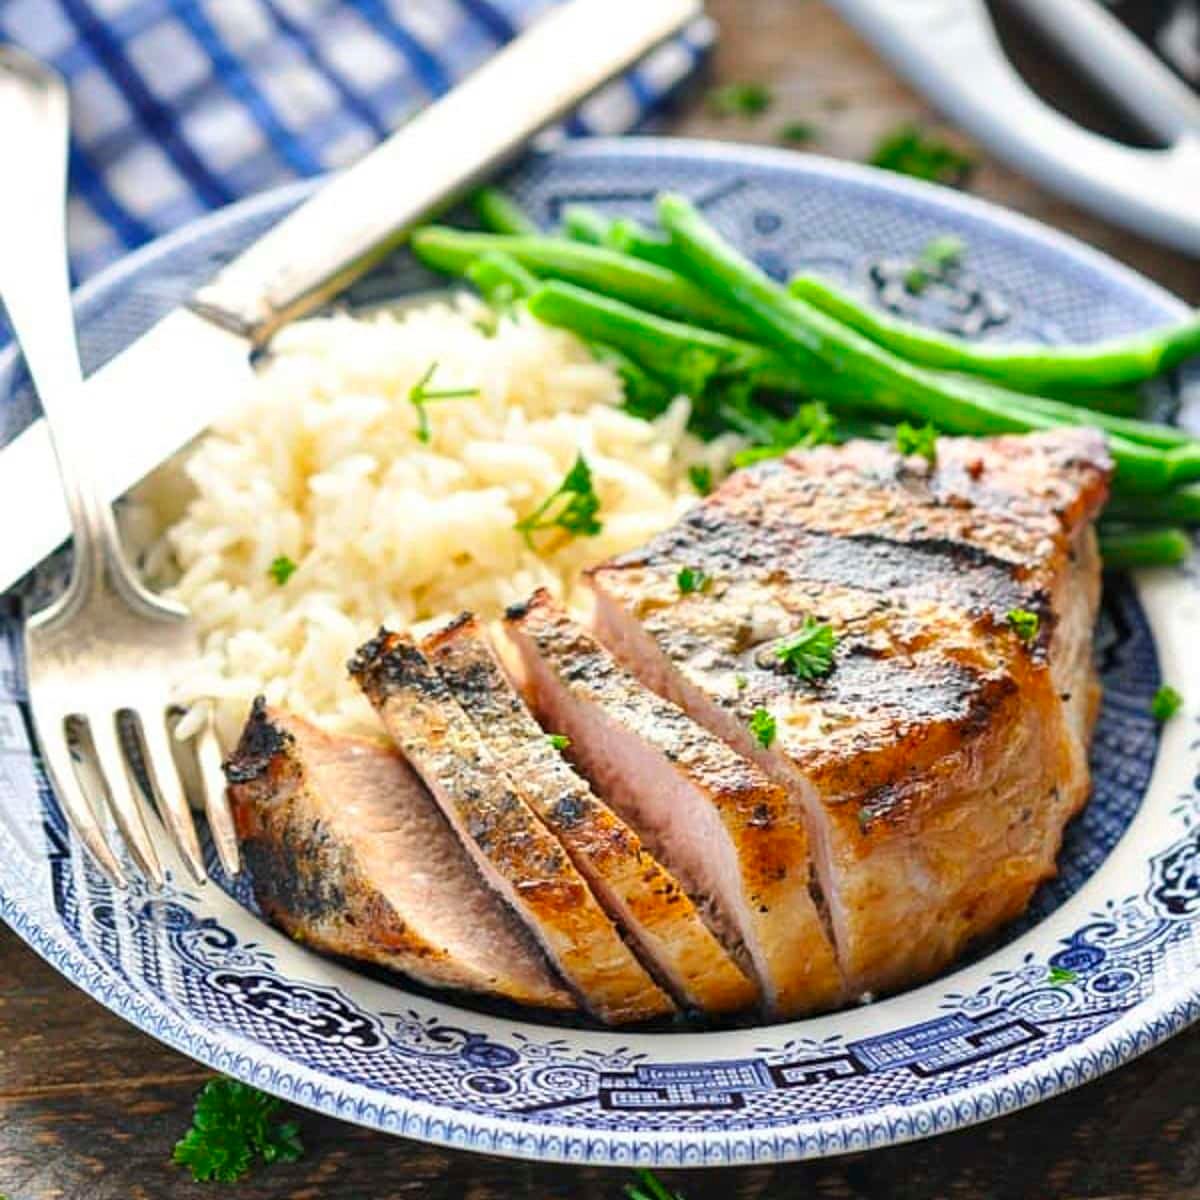 Square side shot of grilled pork chop recipes on a blue and white plate.